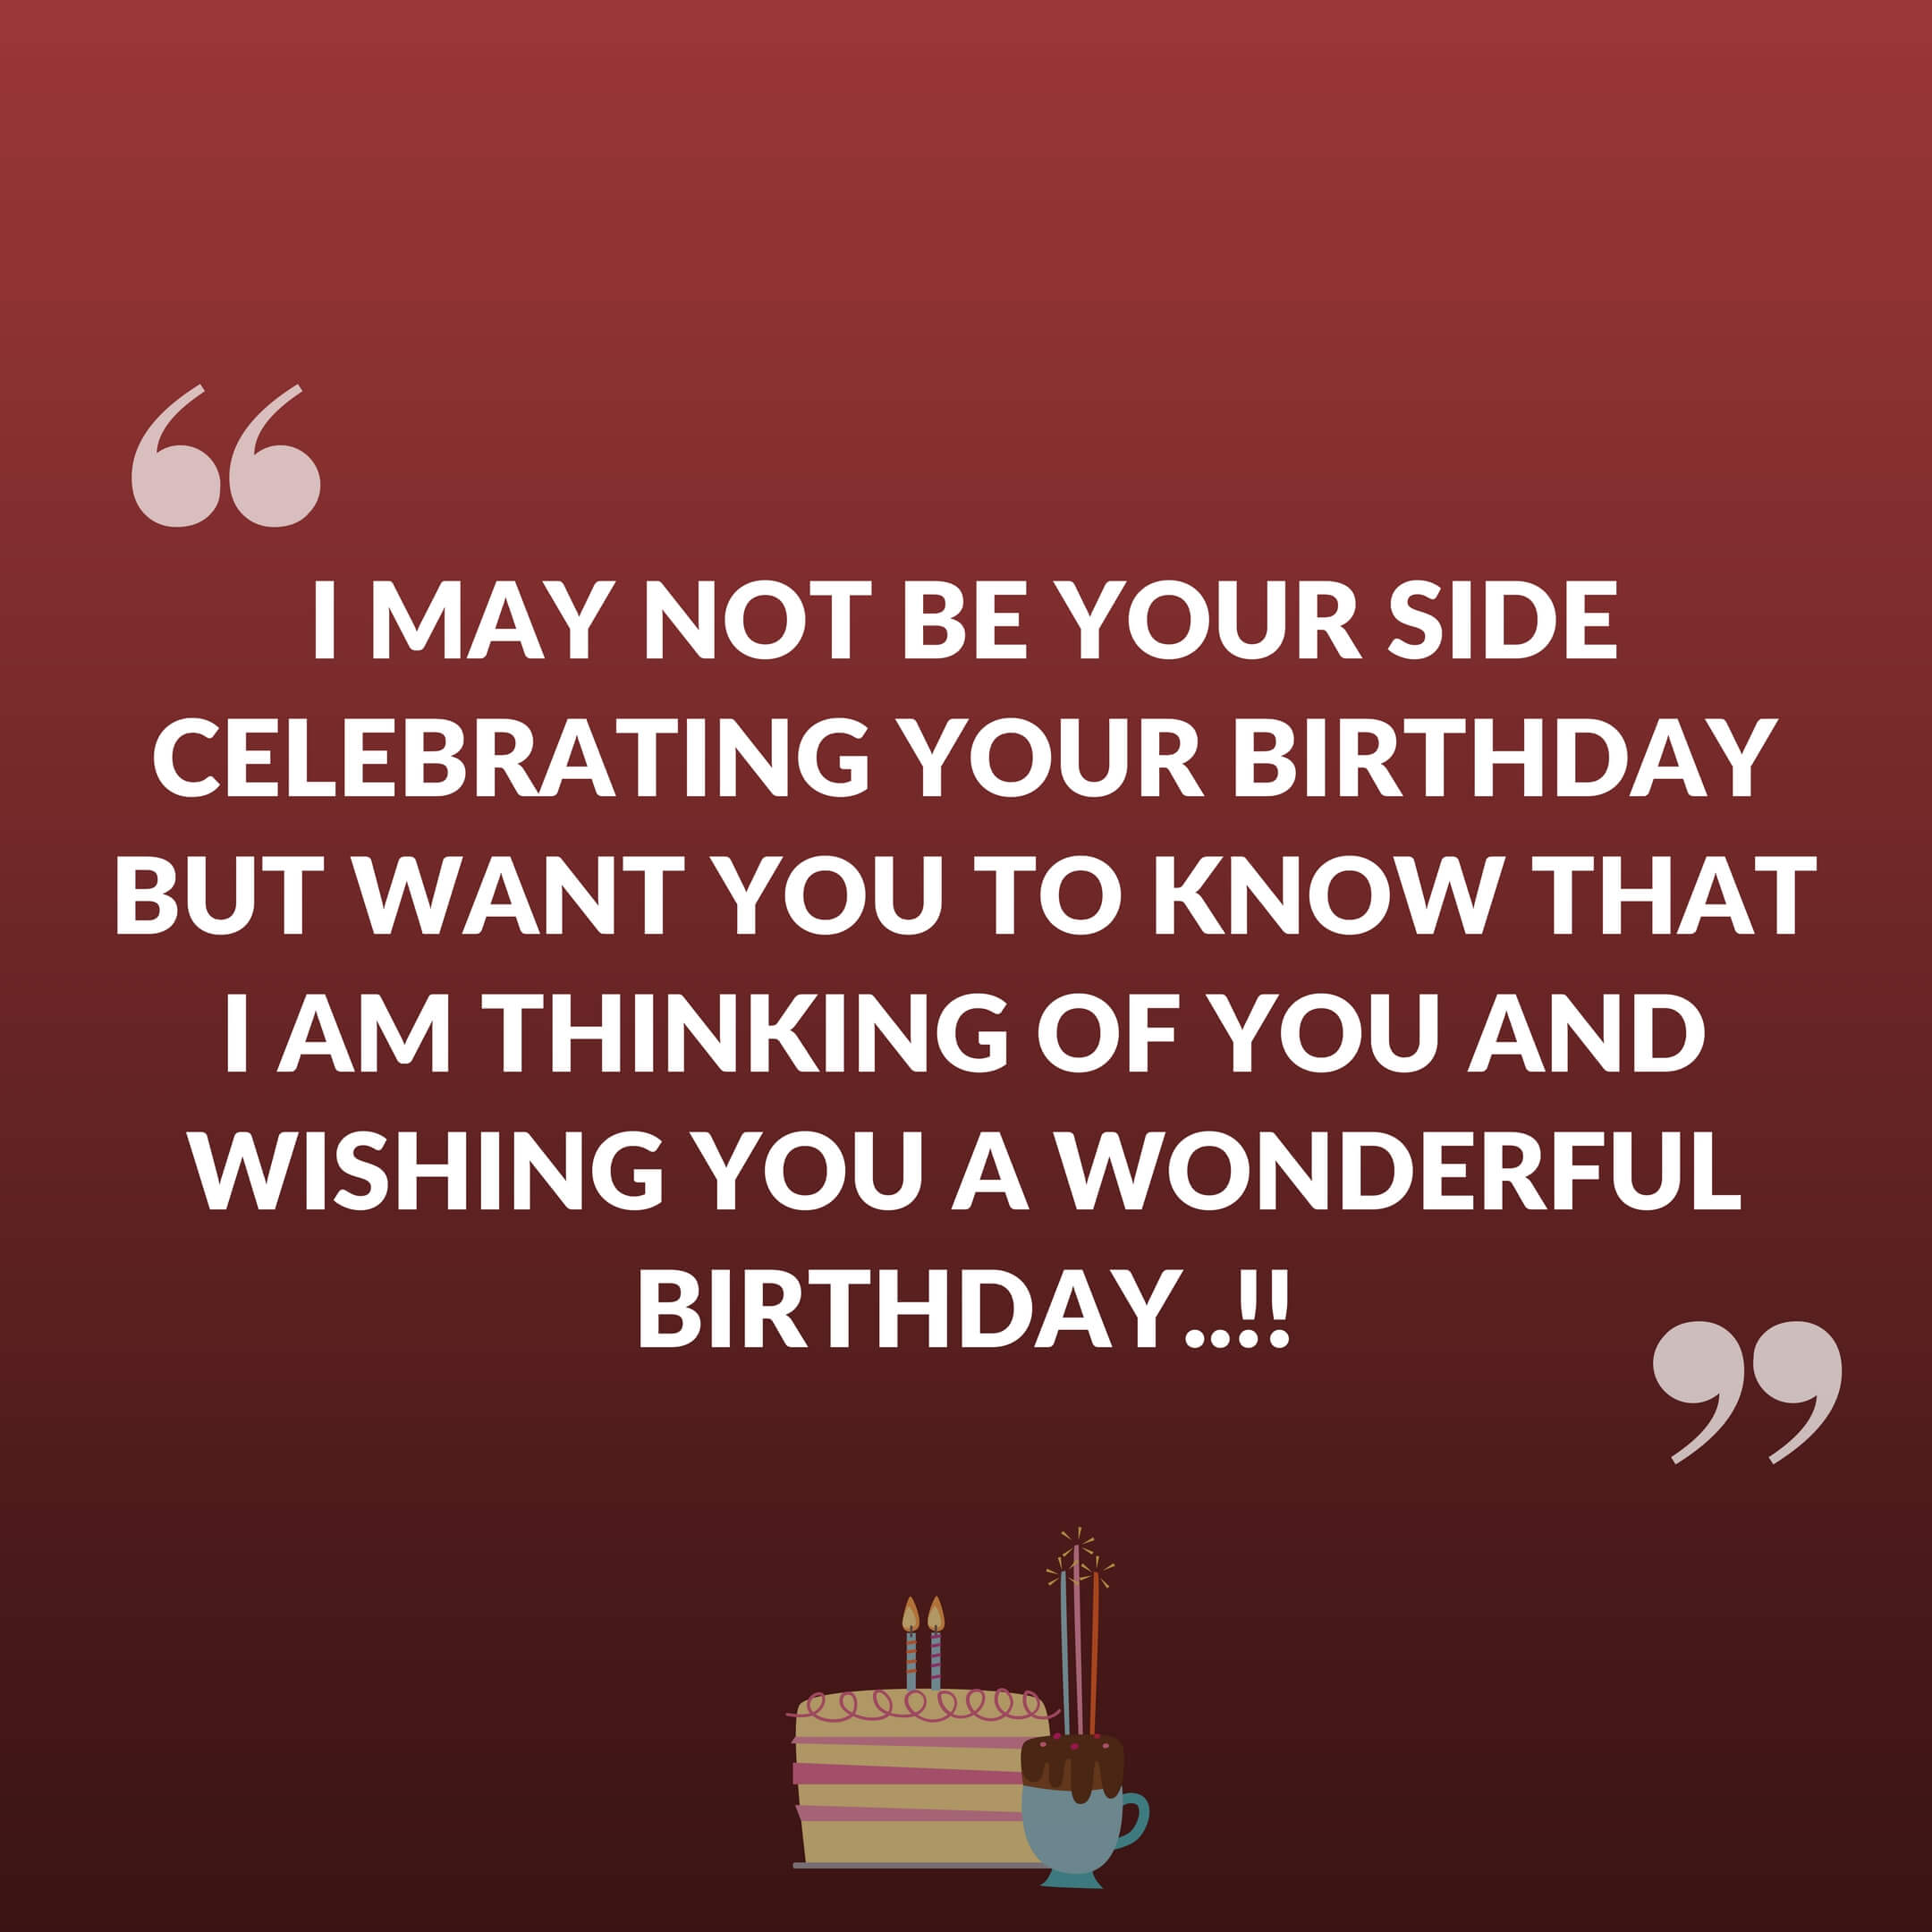 Birthday Wishes Images And Quotes The Cake Boutique